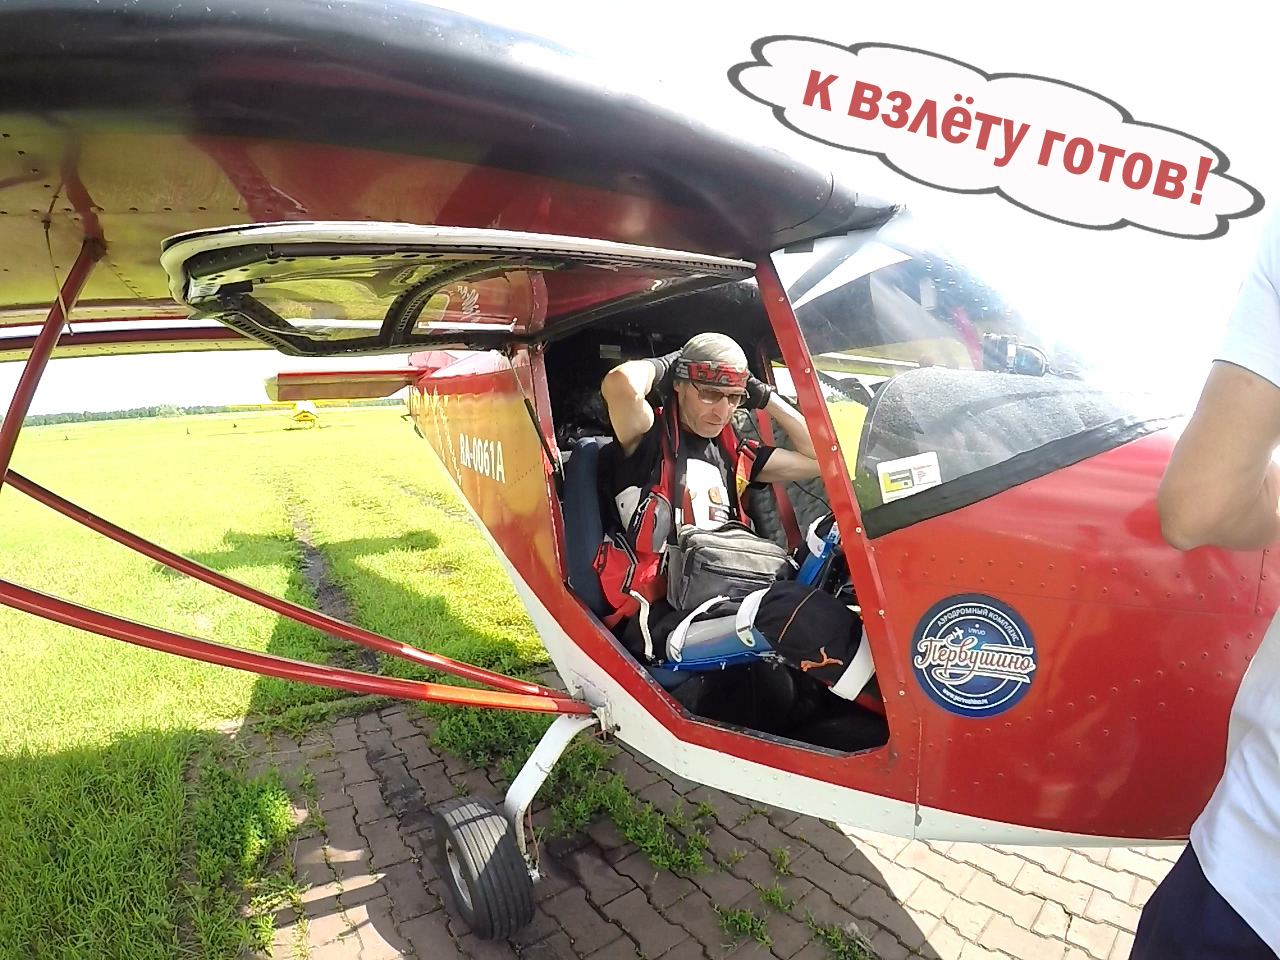 I'm always being carried somewhere... - My, Igor Skikevich, Disabled person, Dream, Pervushino, The first flight, Savannah, Airplane, Ufa, The airport, Tourism, Flight, Aviation, Longpost, 